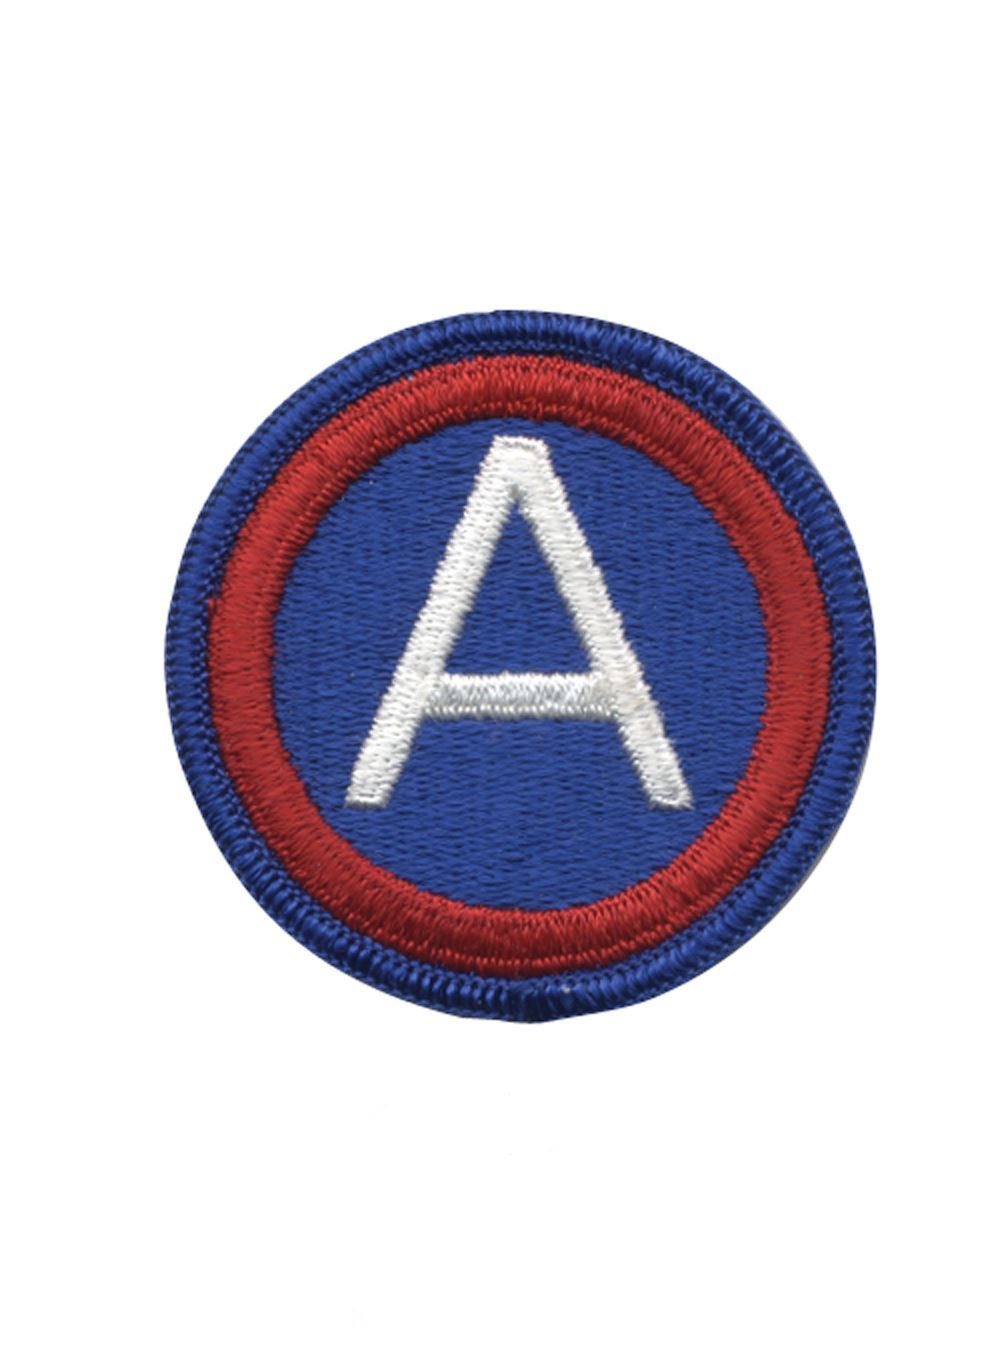 Patch - 3rd Army (10 per pack)